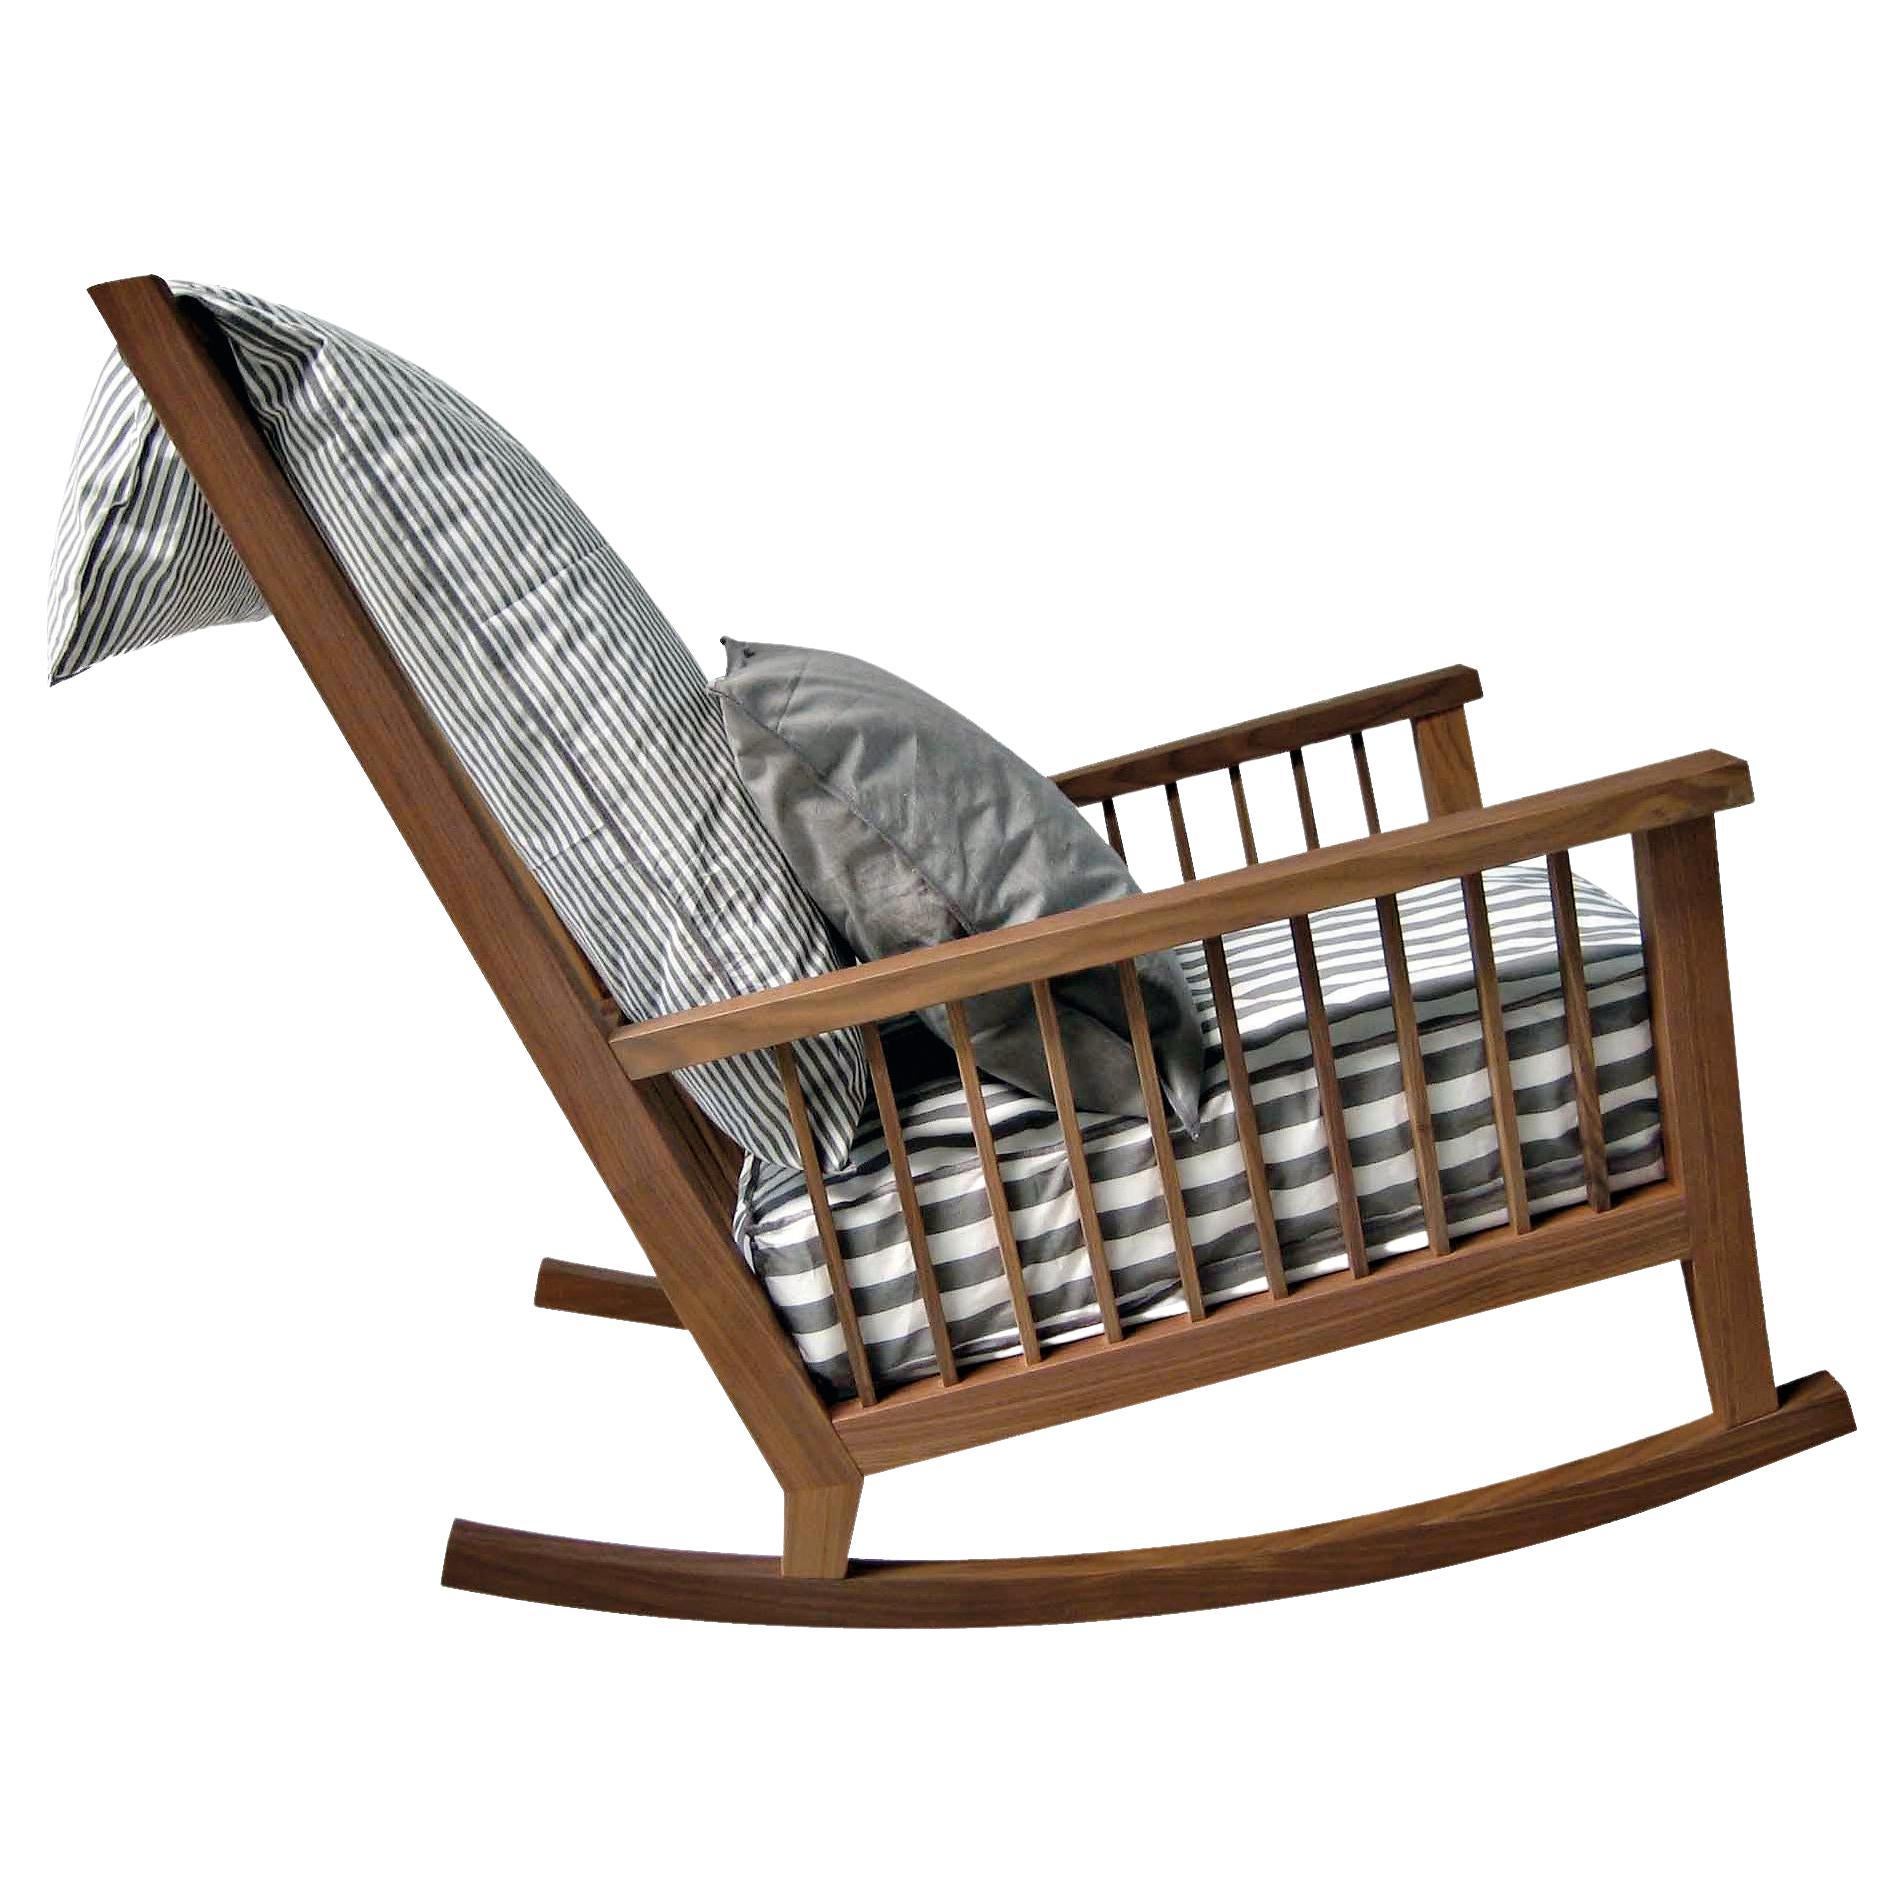 Gervasoni Inout 709 Rocking Chair in Berlin 03 Upholstery with Oiled Iroko Frame For Sale